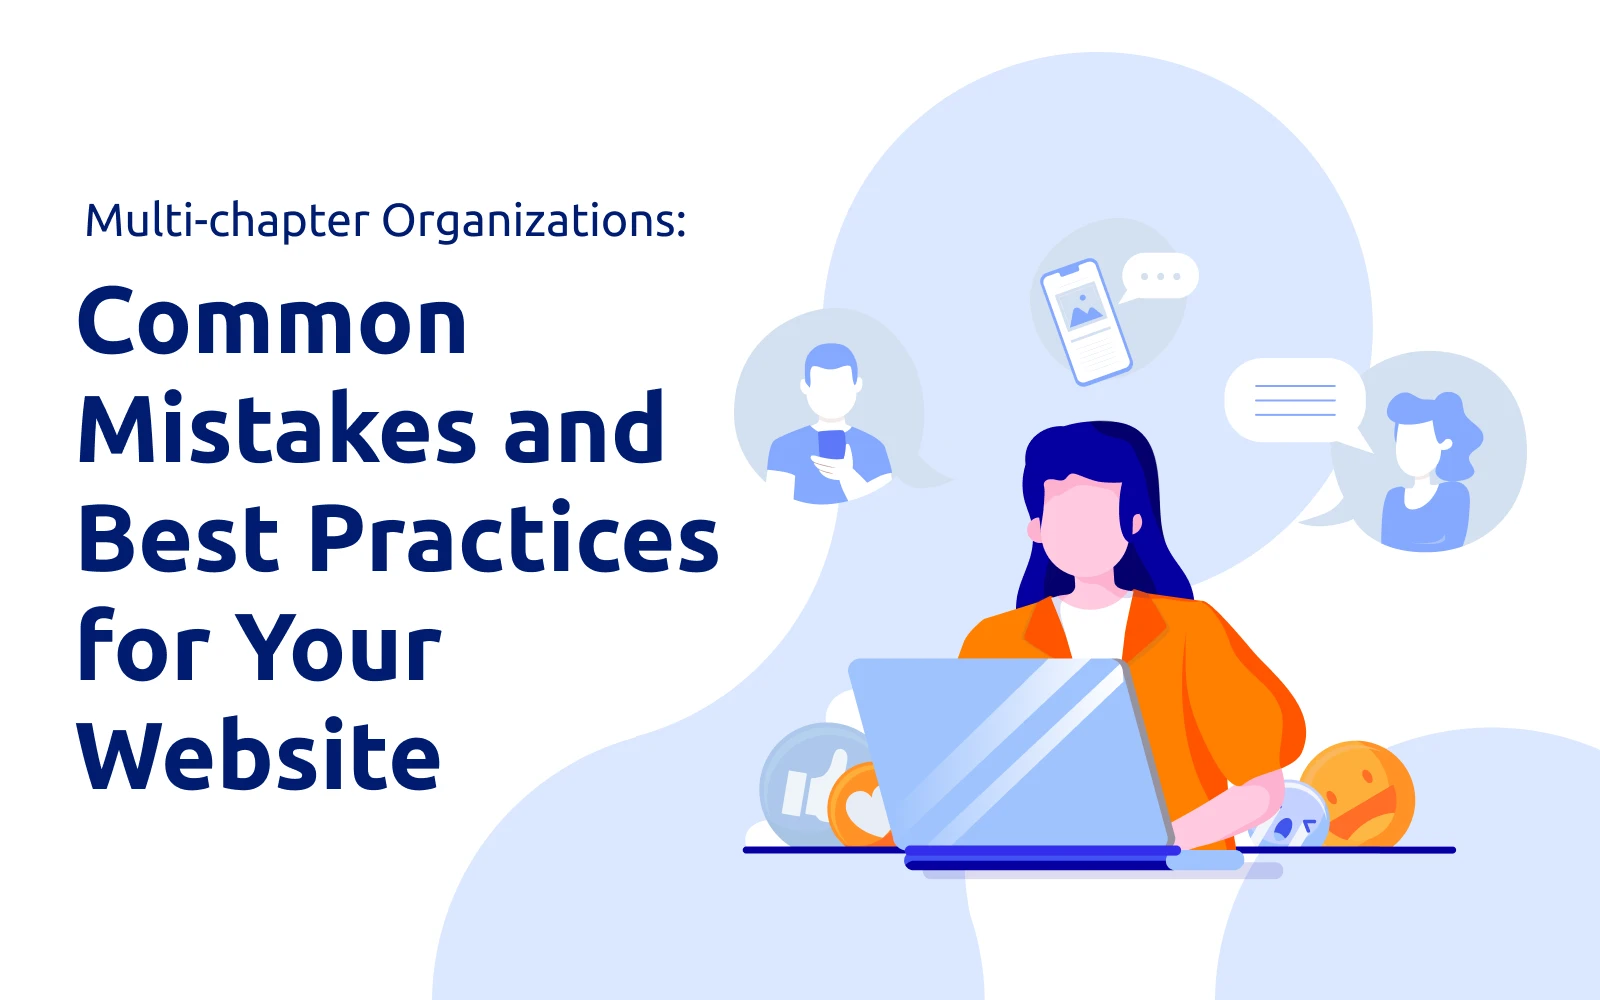 Multi-Chapter Organizations: Common Mistakes and Best Practices for Your Website